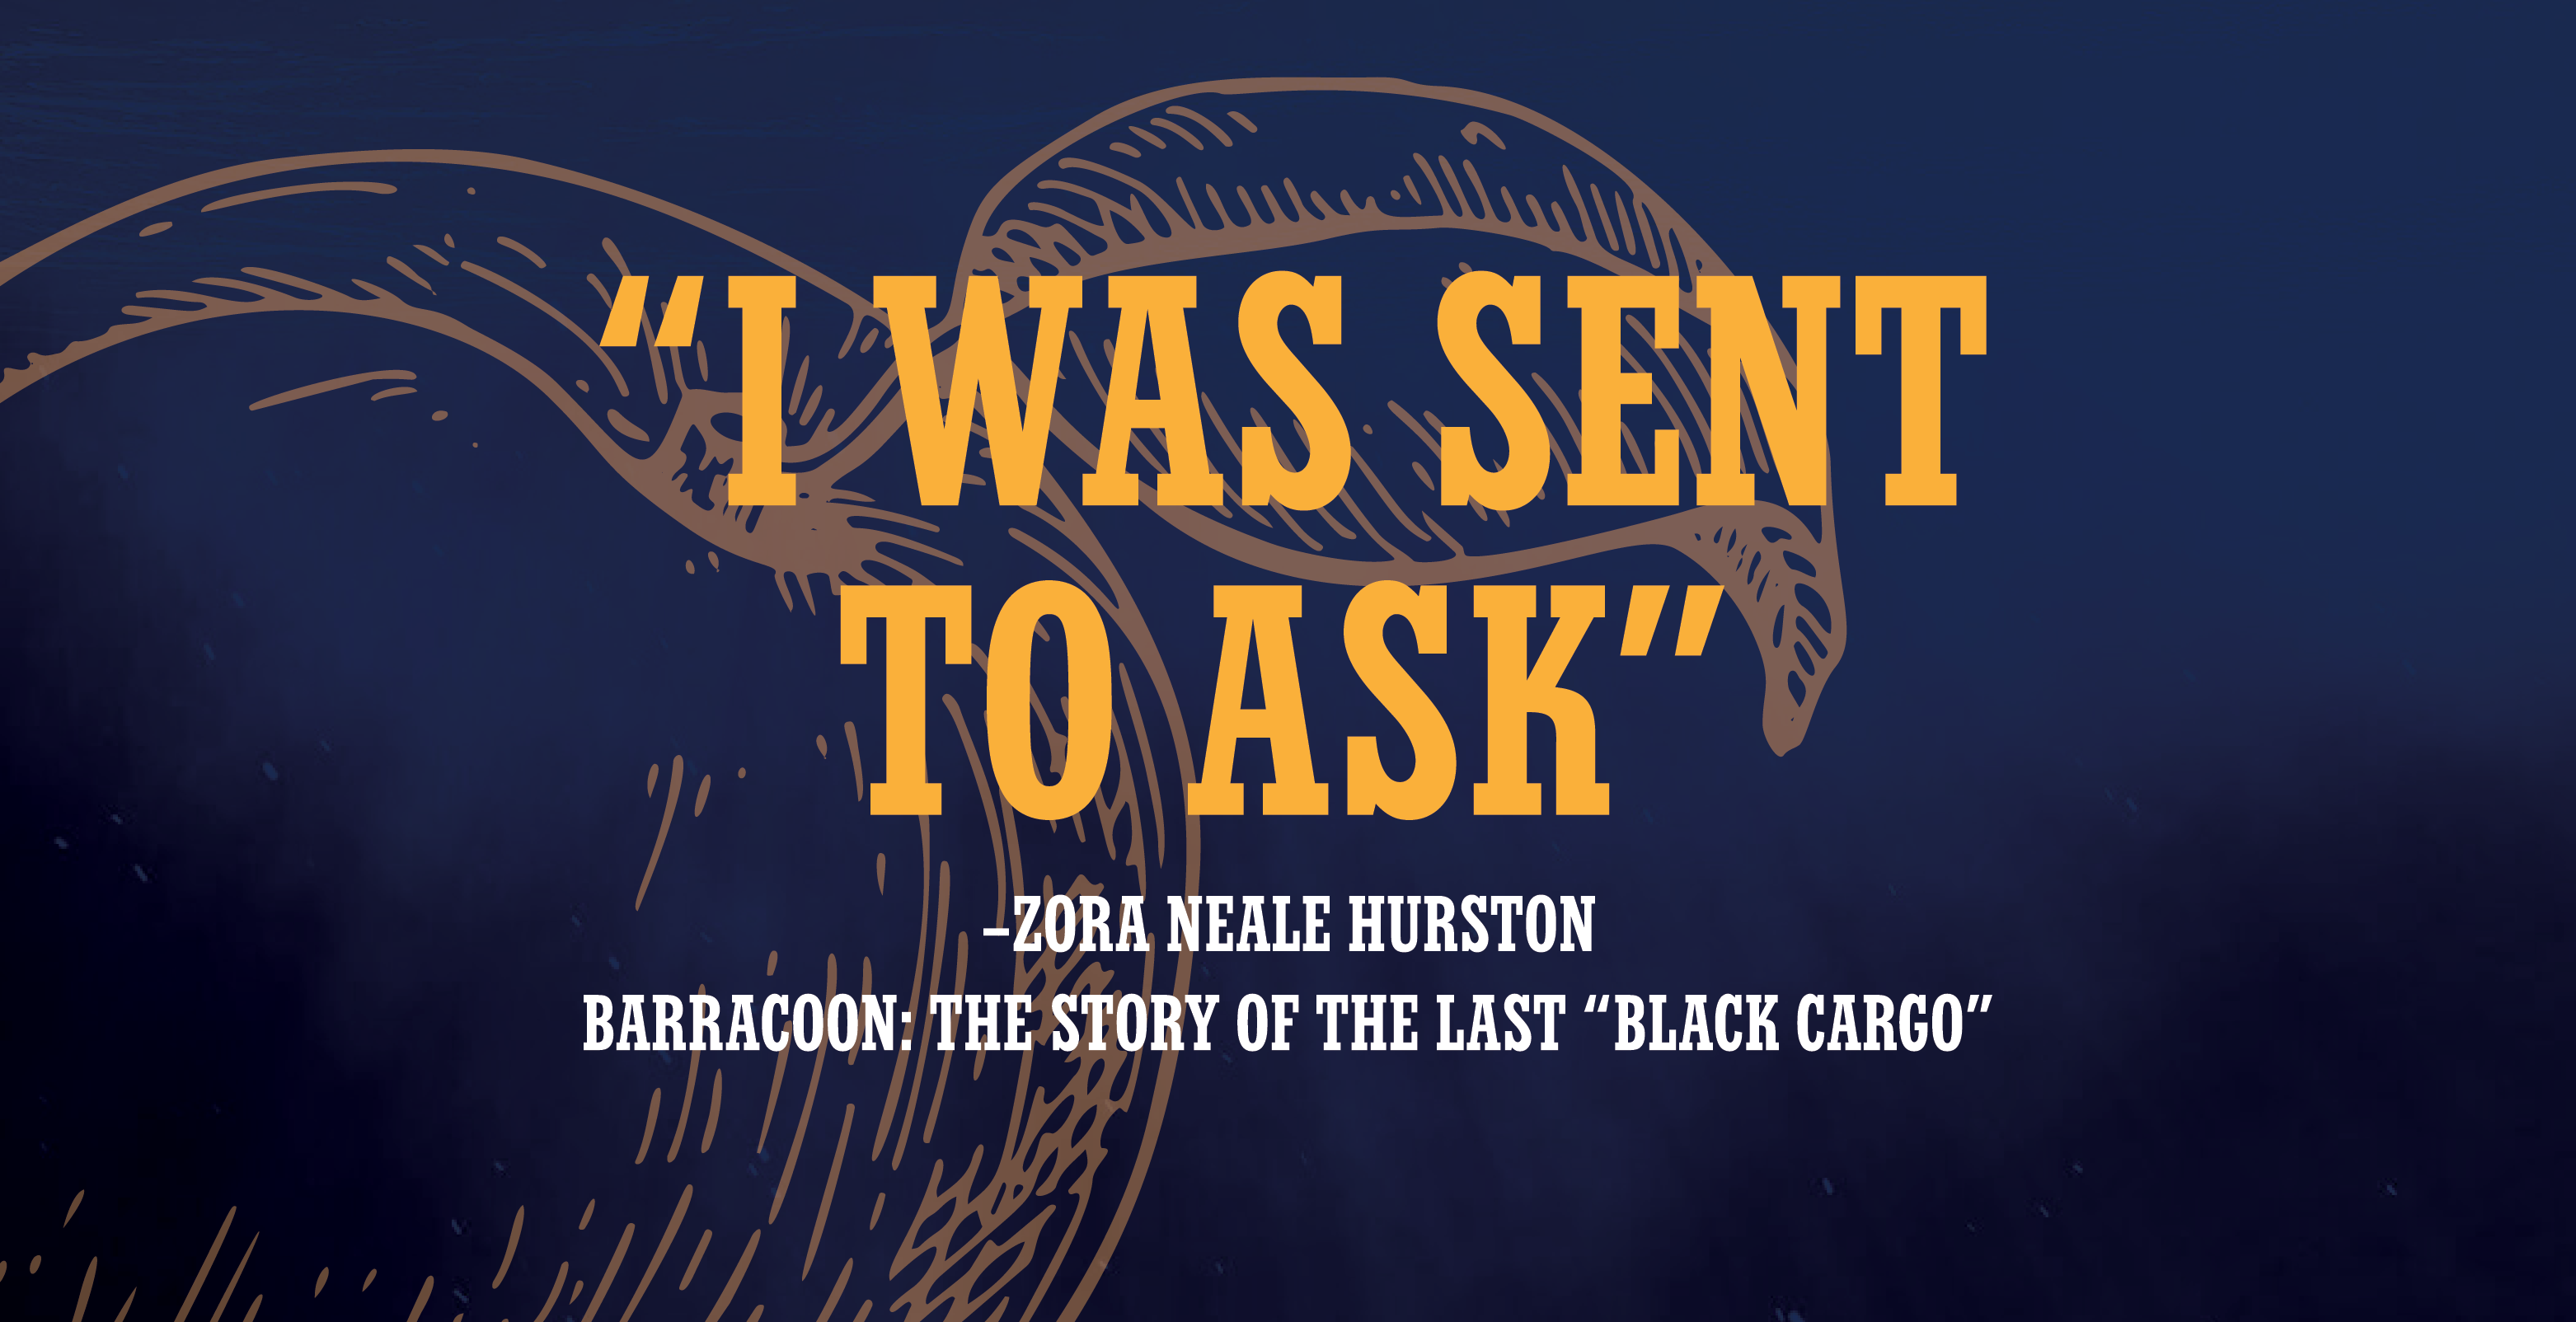 Barracoon: The Story of the Last Black Cargo, USA Common Read book